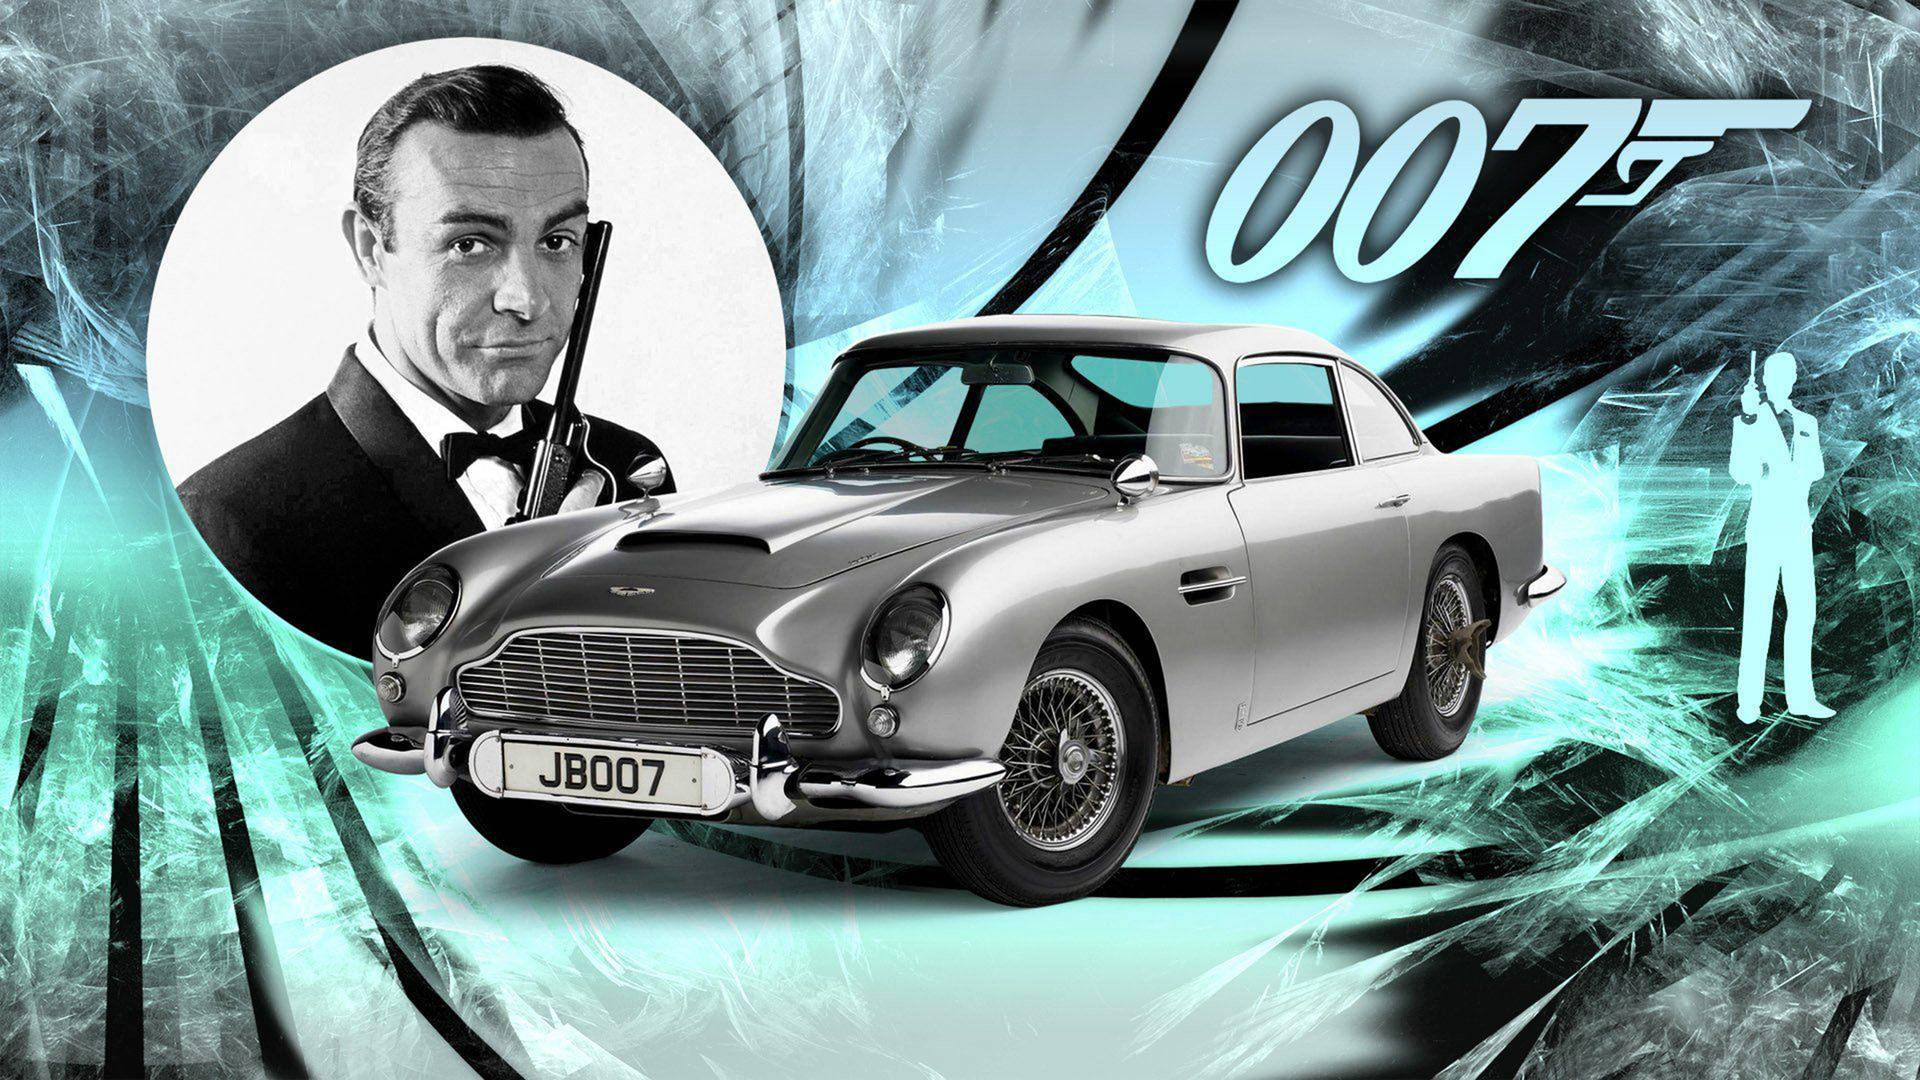 Sean Connery Spion Postere Wallpaper